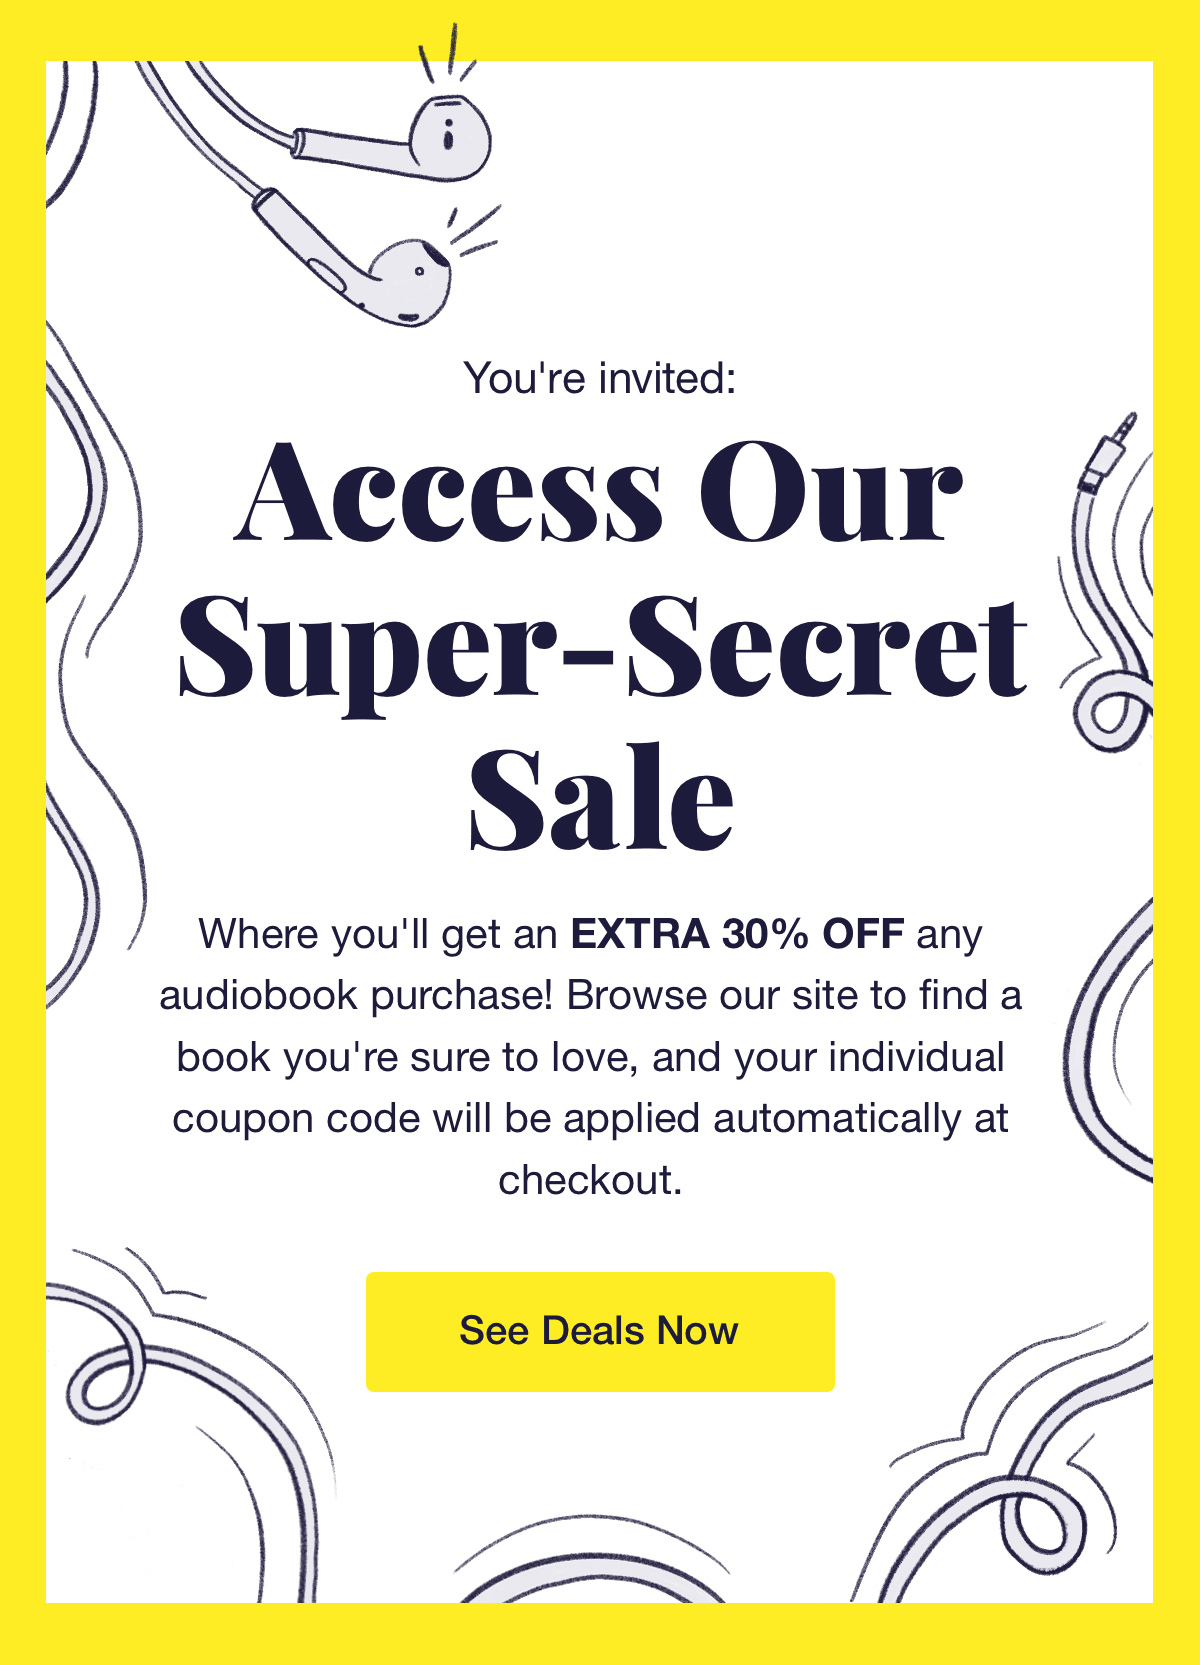 You're invited! Access our super secret sale, where you'll get an extra 30% off any audiobook purchase! Browse our site to find a book you're sure to love, and your individual coupon code will be applied automatically at checkout. See Deals Now.